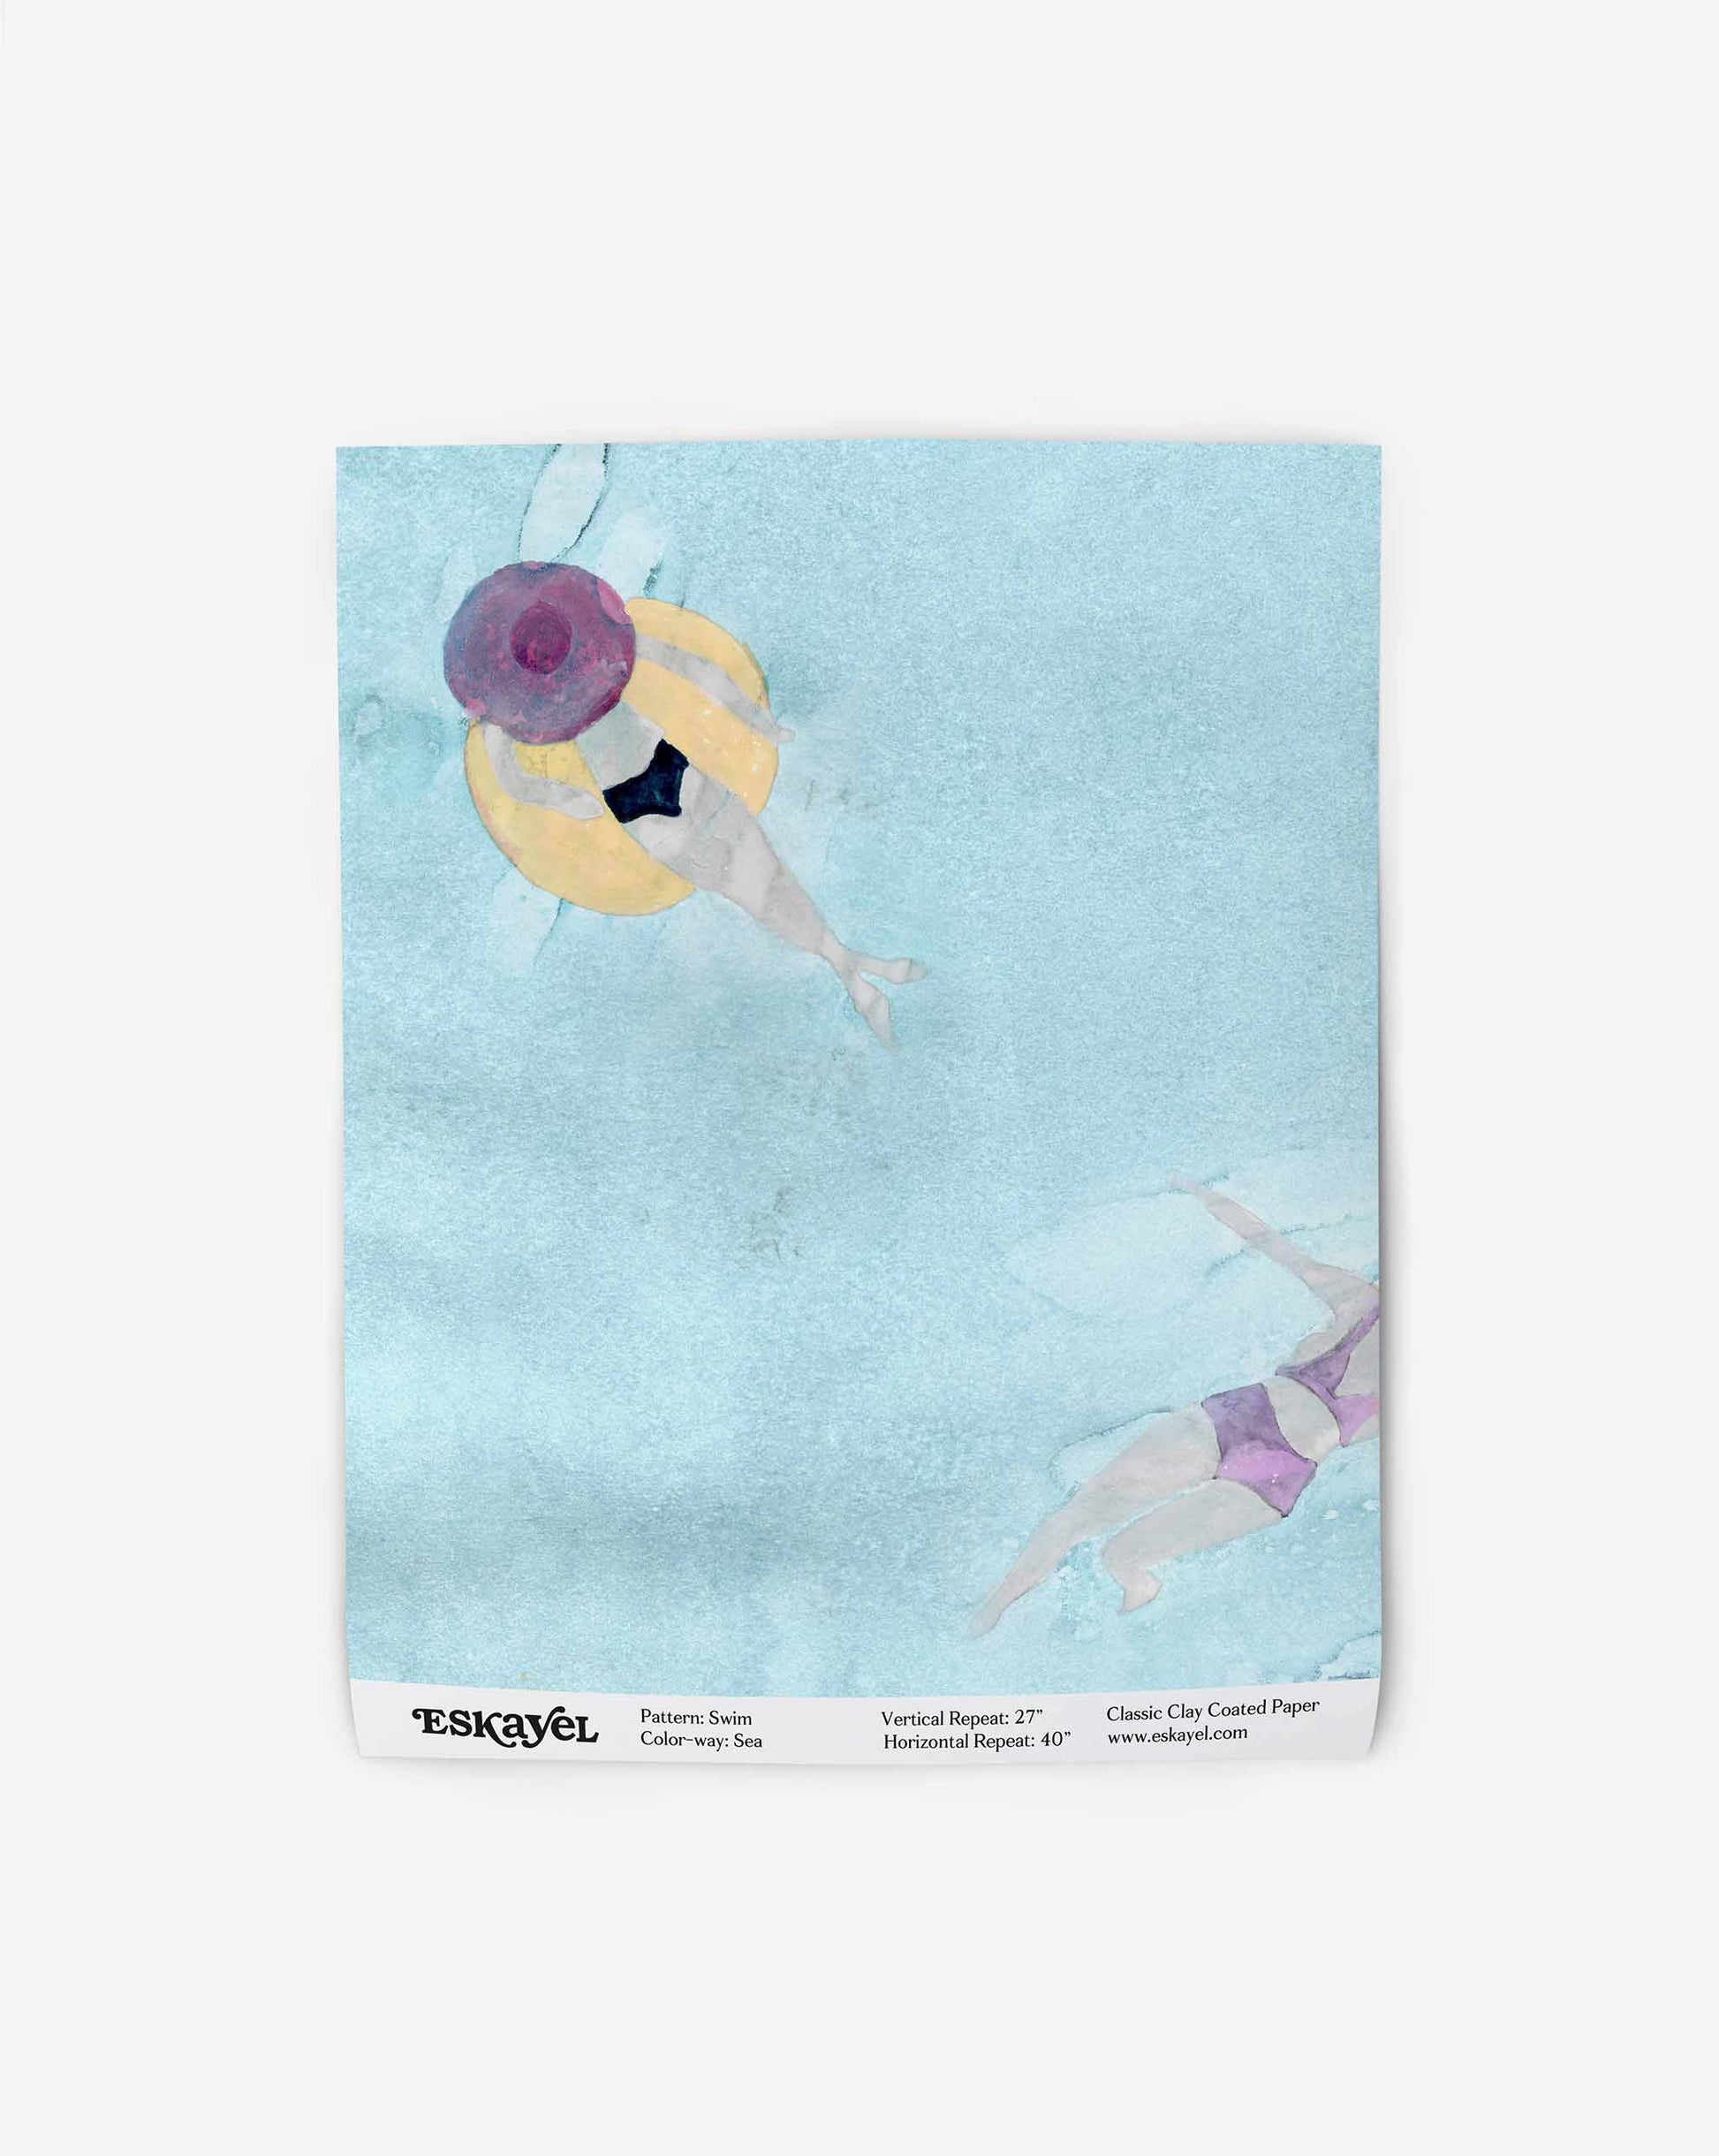 A watercolor painting depicts two figures floating in a pool. One is on a yellow float wearing a purple hat; the other is swimming. The text below reads "Eskayel" with additional details about the painting. Order a Swim Wallpaper Sample||Sea to appreciate its intricate beauty up close.